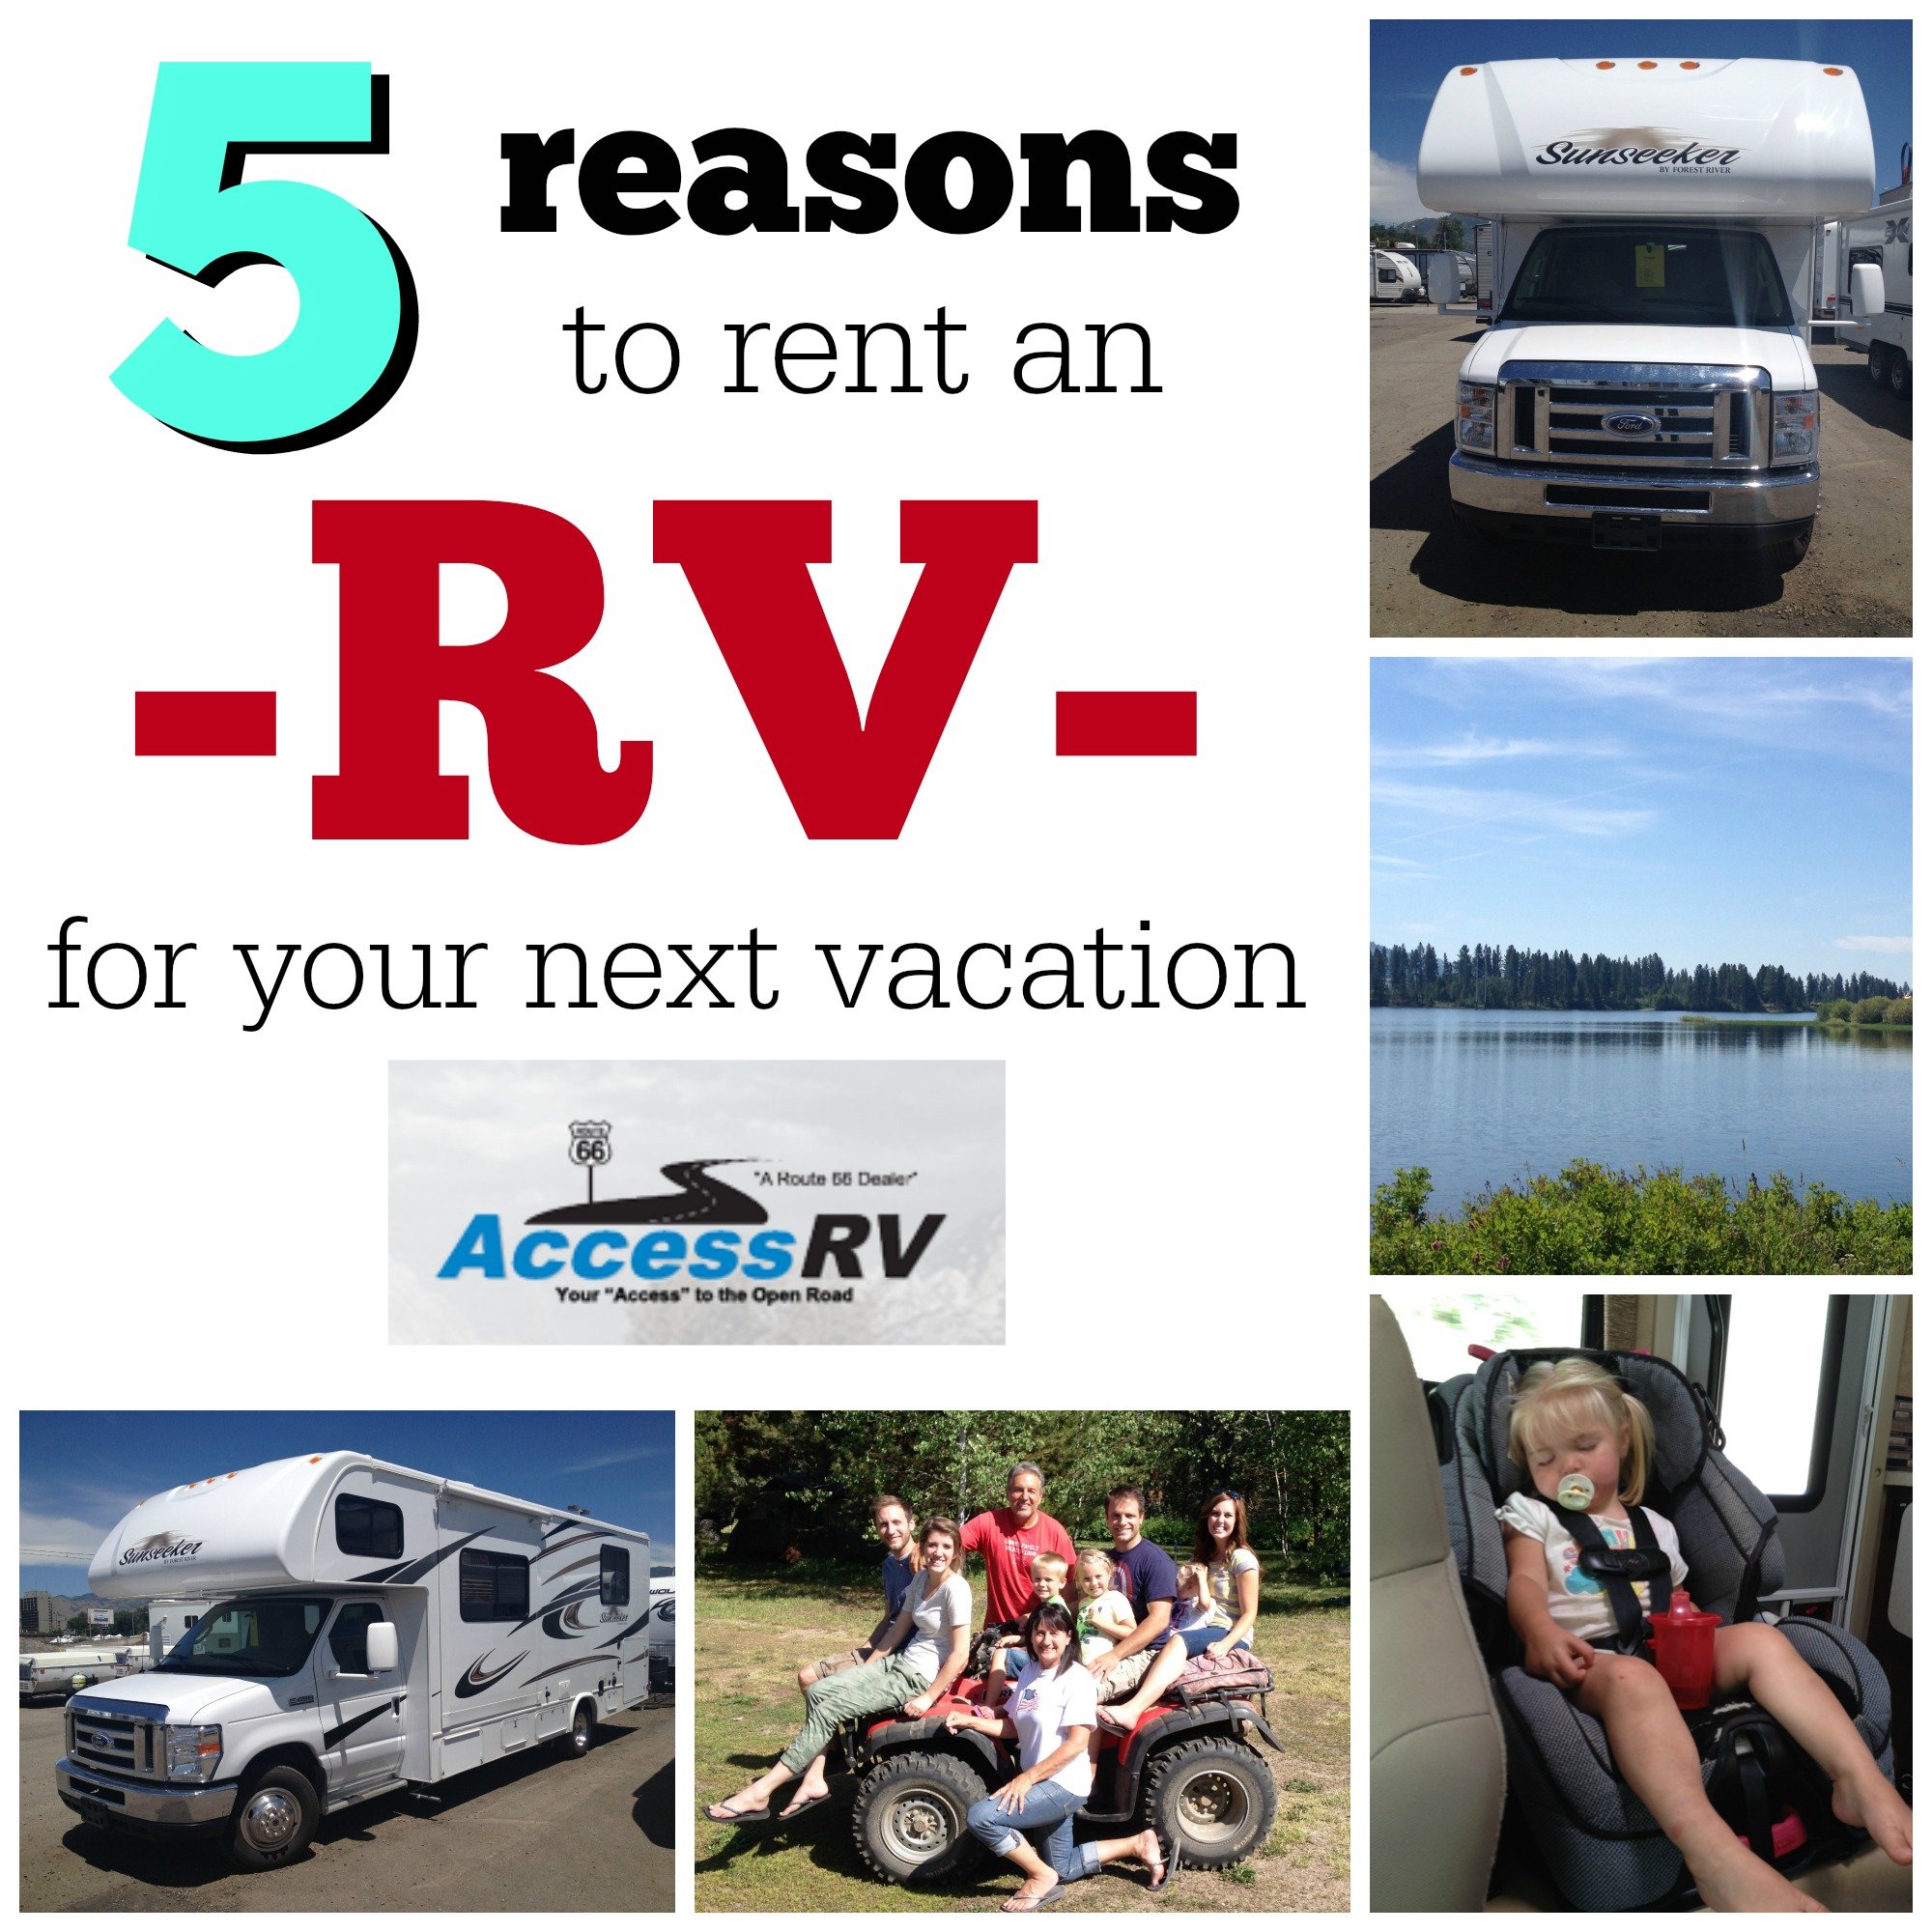 Our Summer RV Roadtrip (and 5 reasons to rent an RV!)